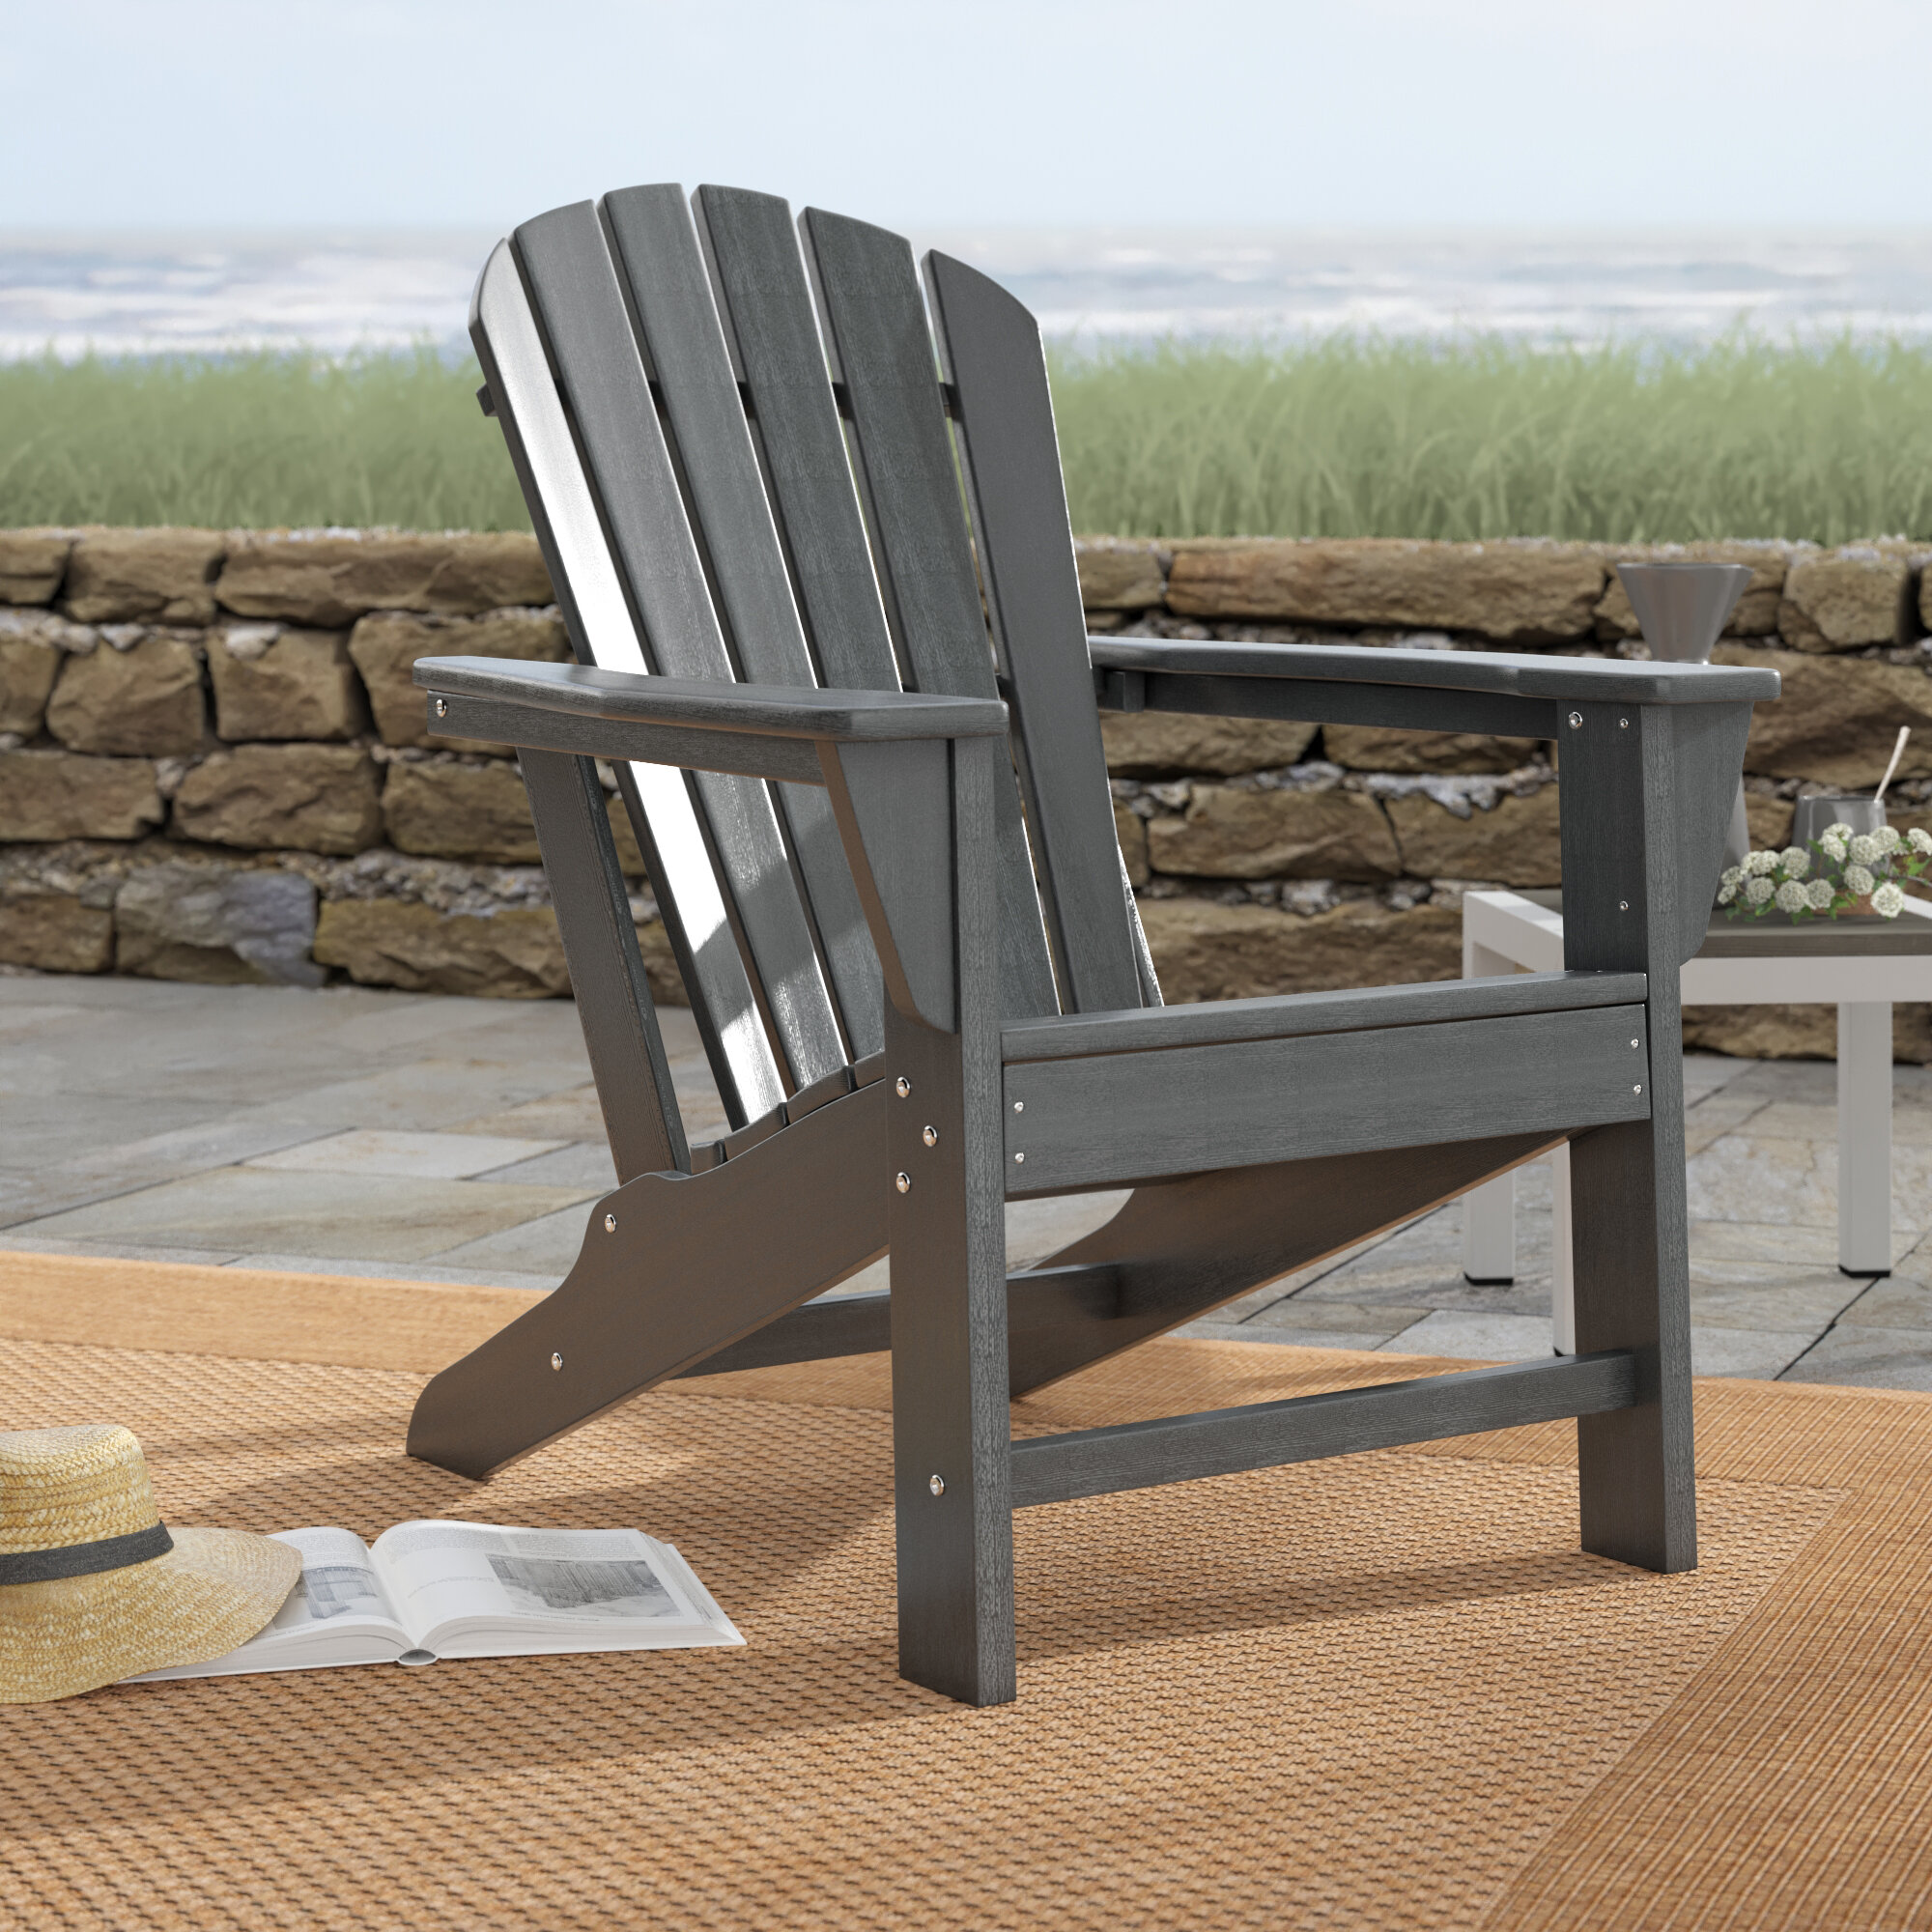 Step-by-Step Guide to Building Your Own Adirondack Chair插图4